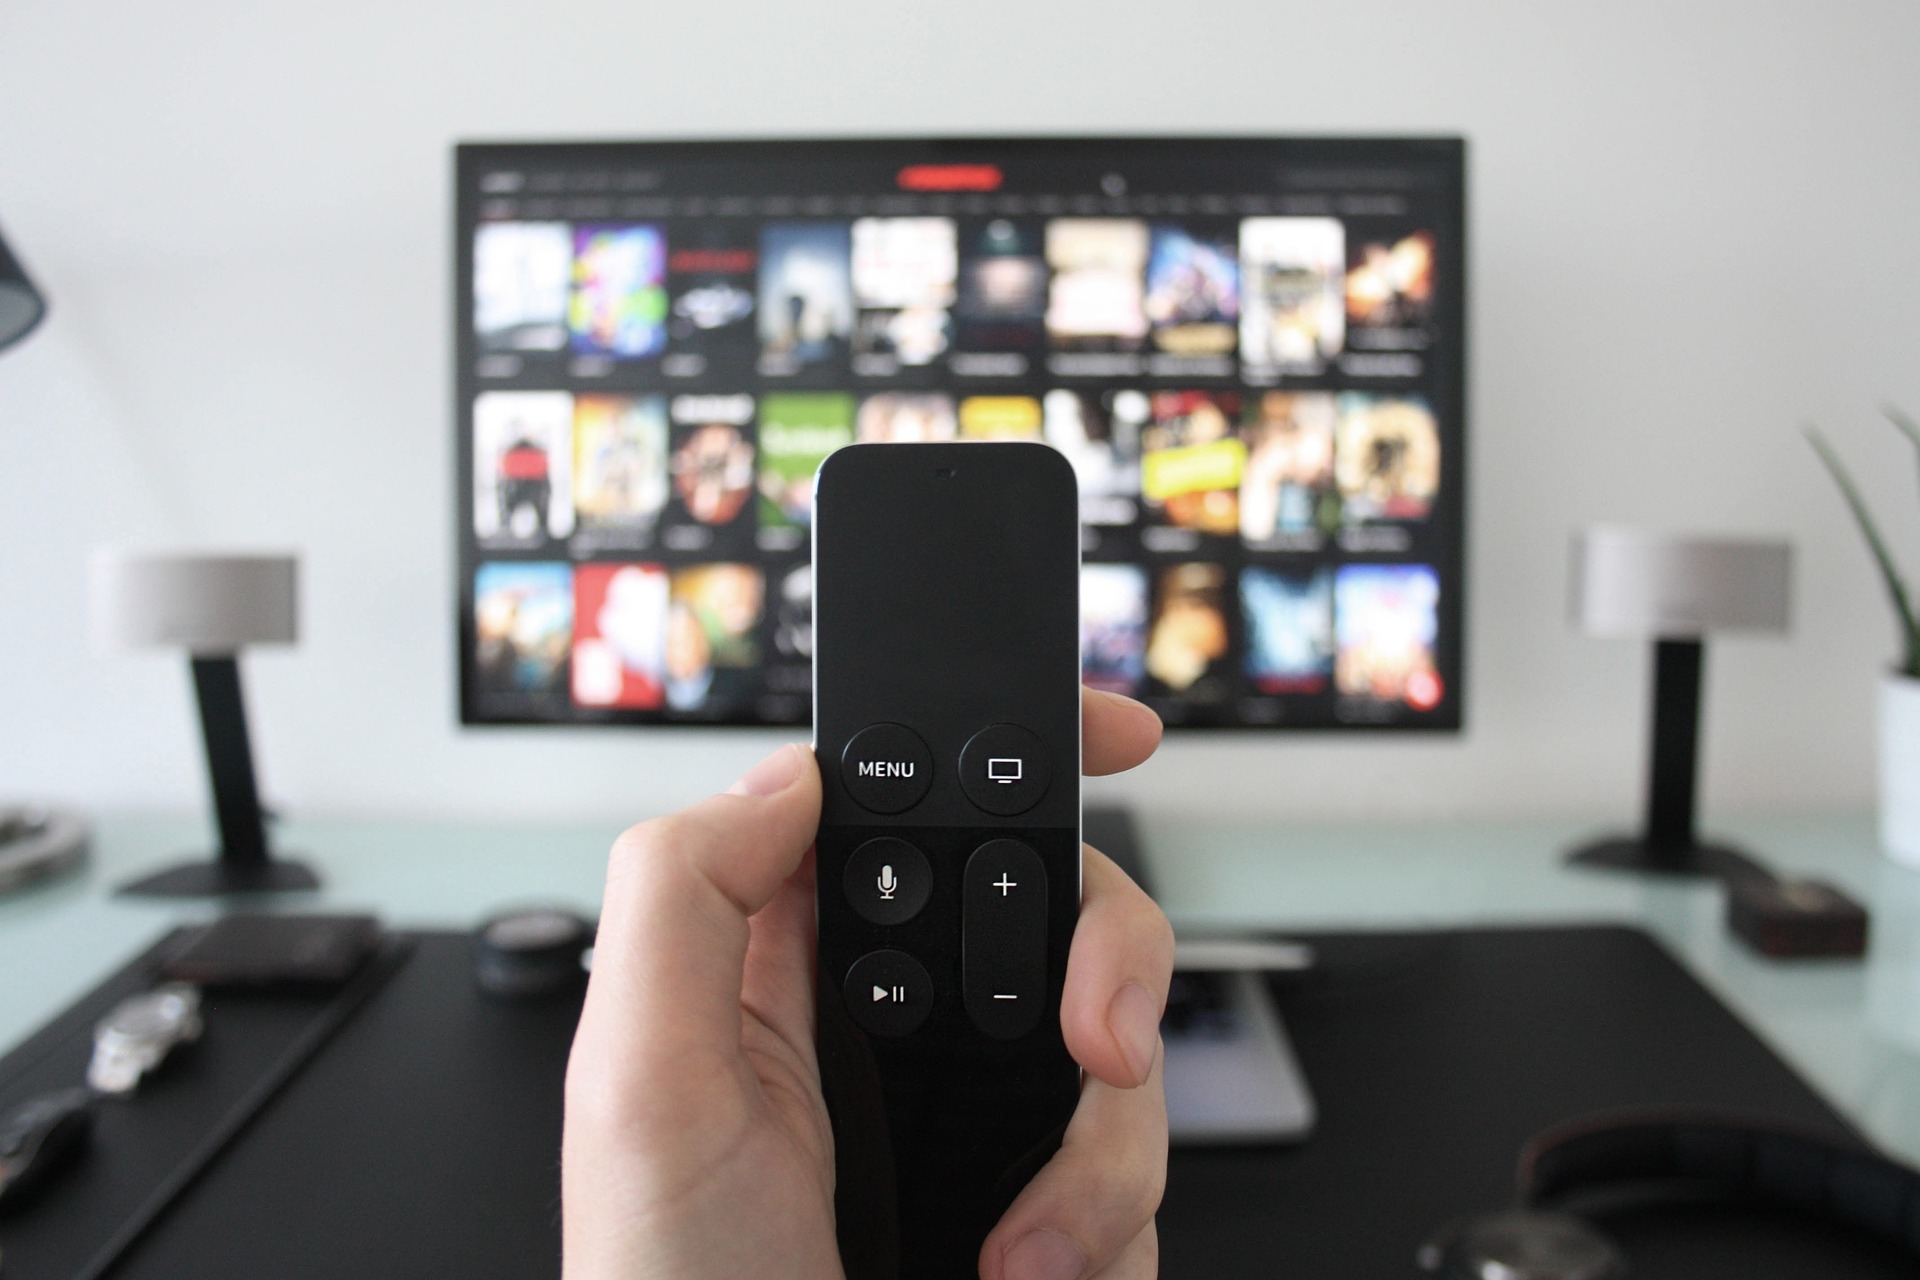 Photograph of a remote control for a smart tv pictured in front of a television screen displaying a streaming service.